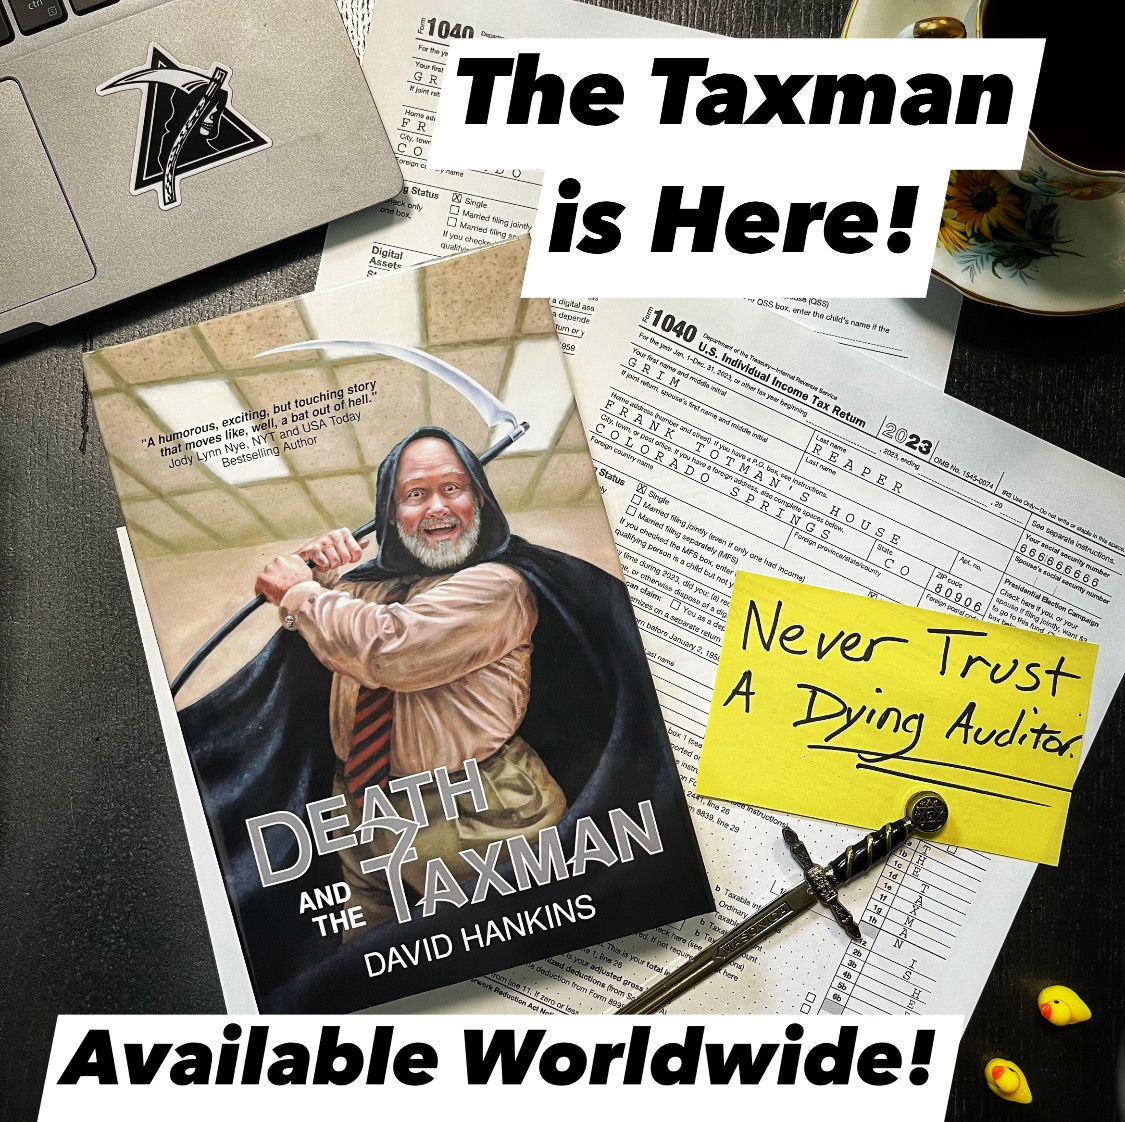 Three weeks since Tax Day and Death and the Taxman is still in the Amazon Top 20 Humor New Releases! Thank you all for the fantastic reviews!

Never trust a dying auditor.
books2read.com/deathandthetax…

#deathandthetaxman #humor #newreleasebooks #writingcommunity #readingcommunity